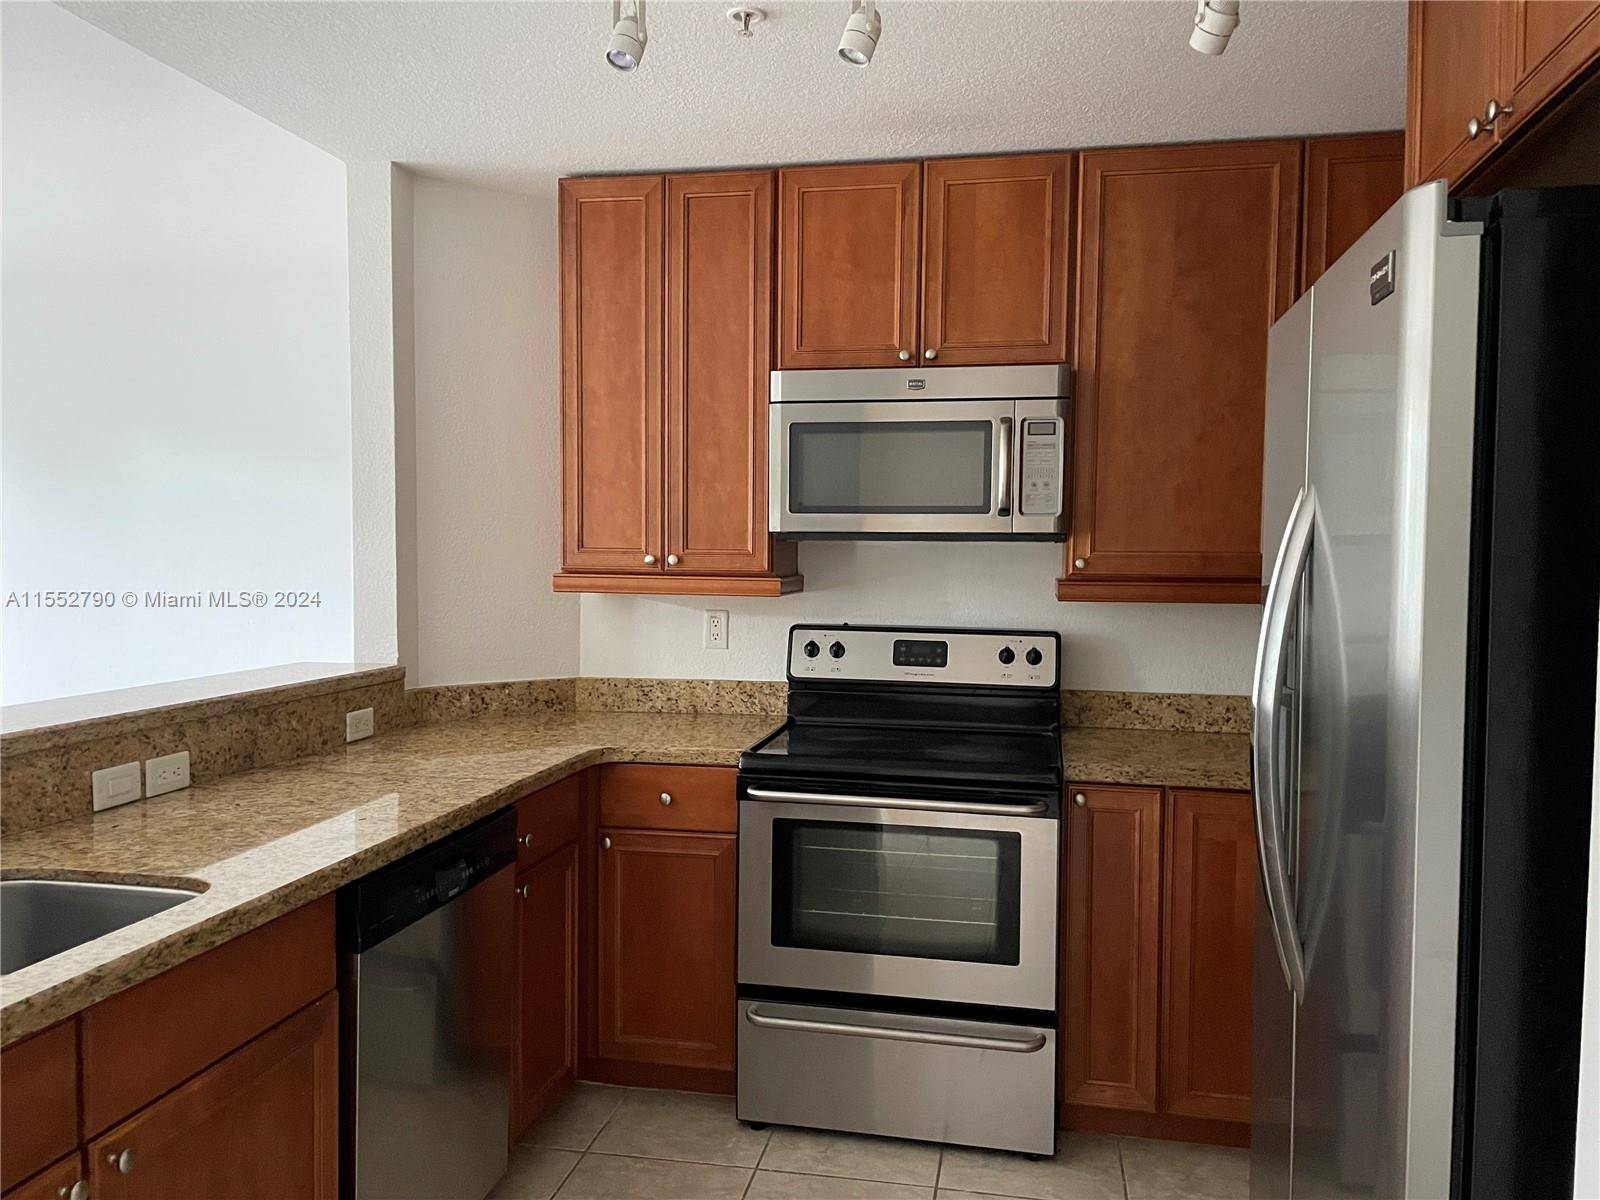 Extremely spacious 1, 600sf apartment with 3 balconies for entertaining or relaxing, washer and dryer inside the unit, central AC, dishwasher and plenty of closet space.